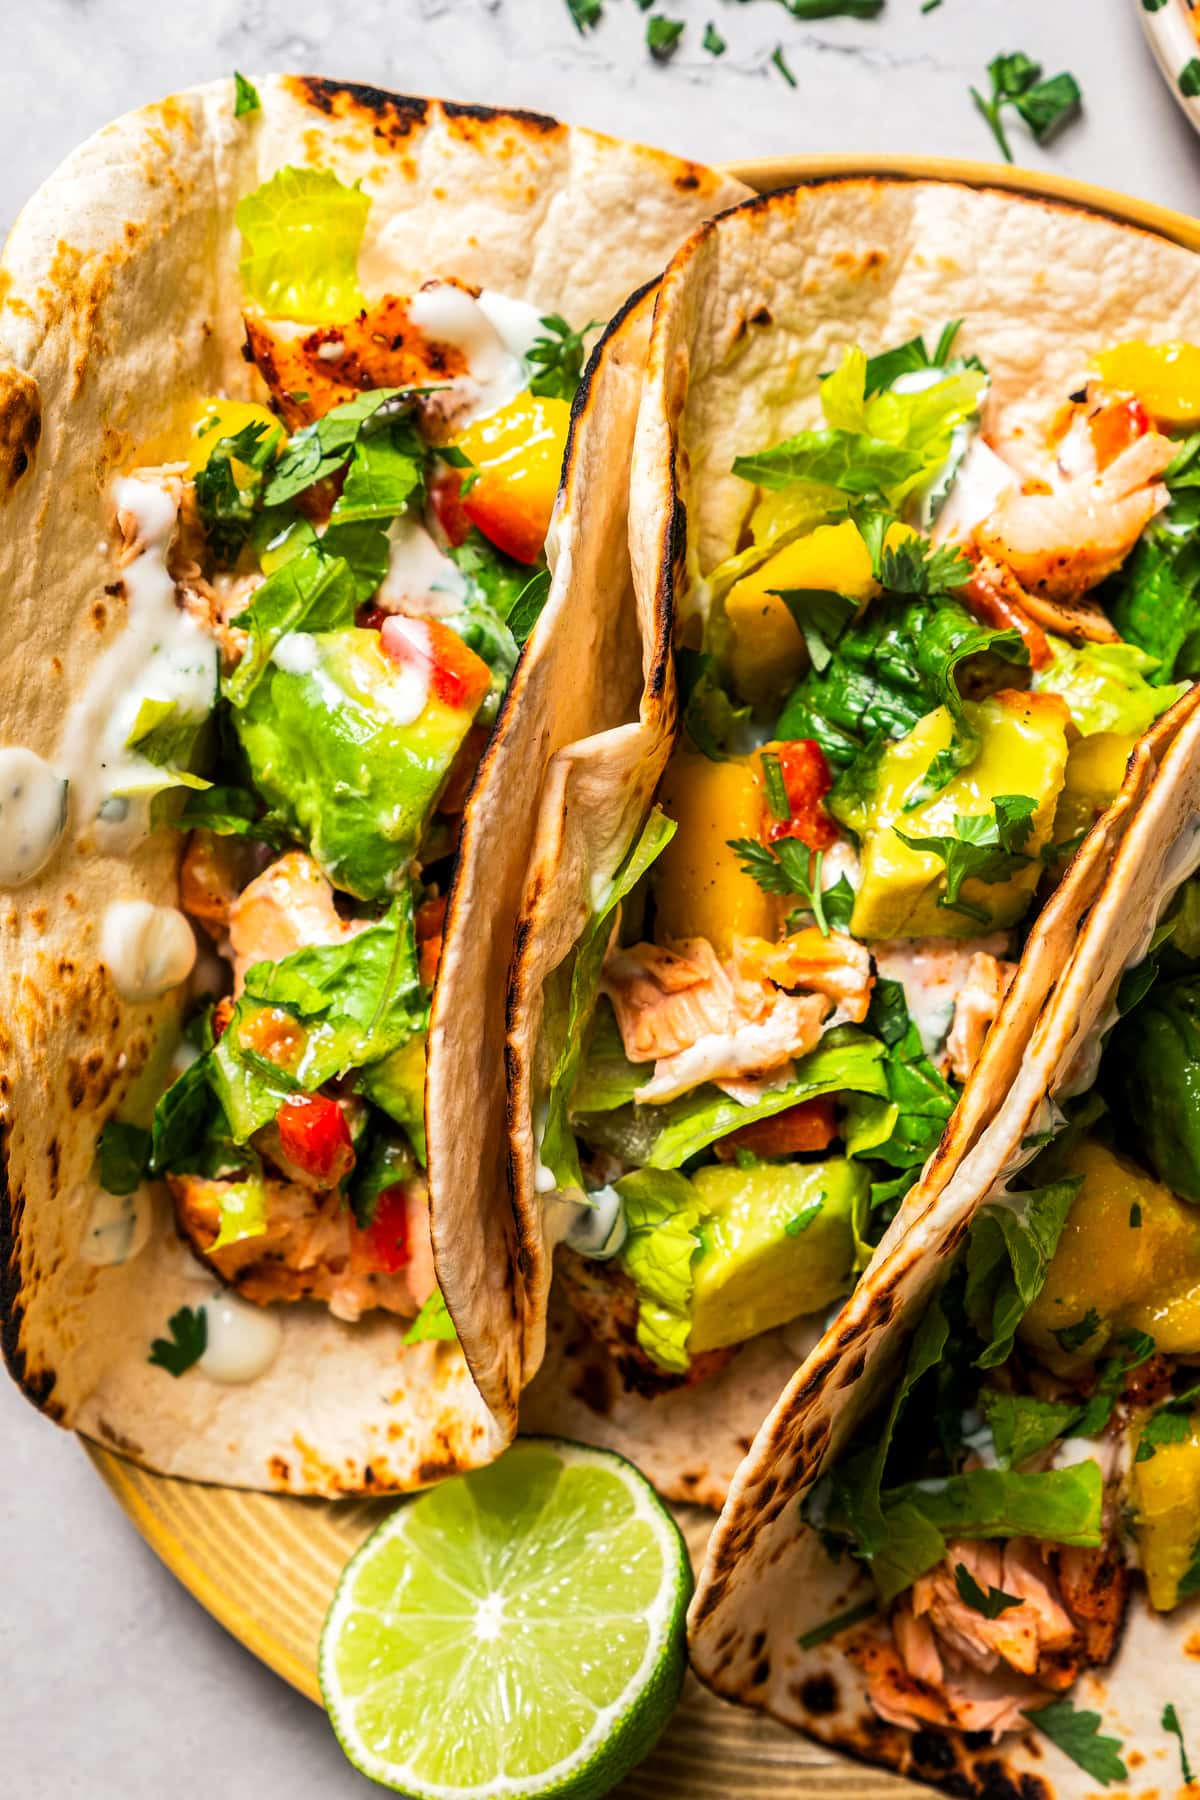 Overhead image of a plate with three tacos with salmon and mango avocado salsa.